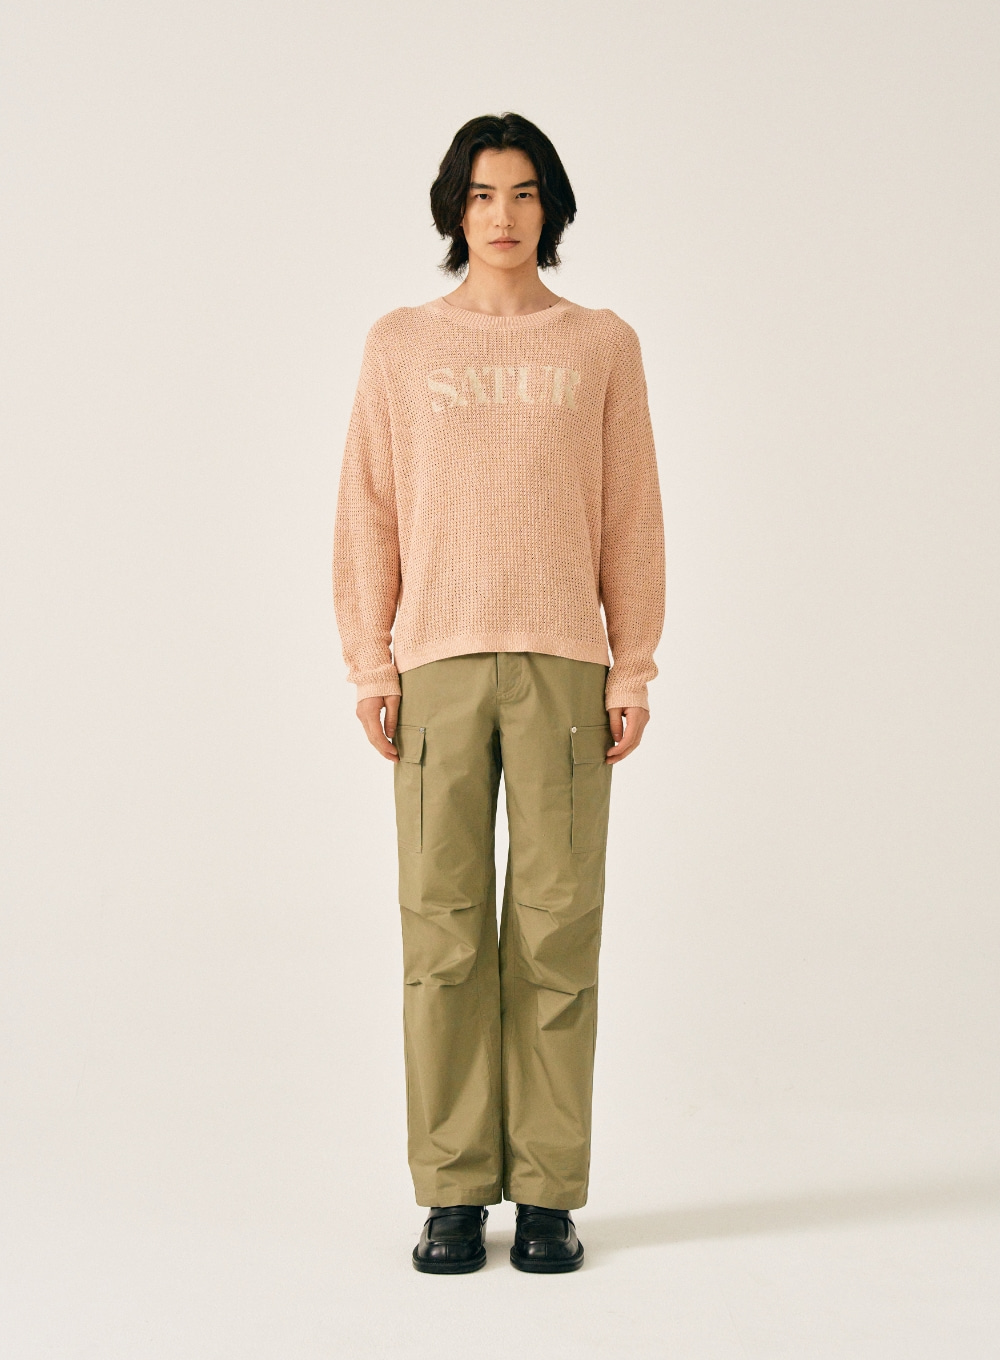 Logo Embroidery Crew Neck Knit - Peach Coral